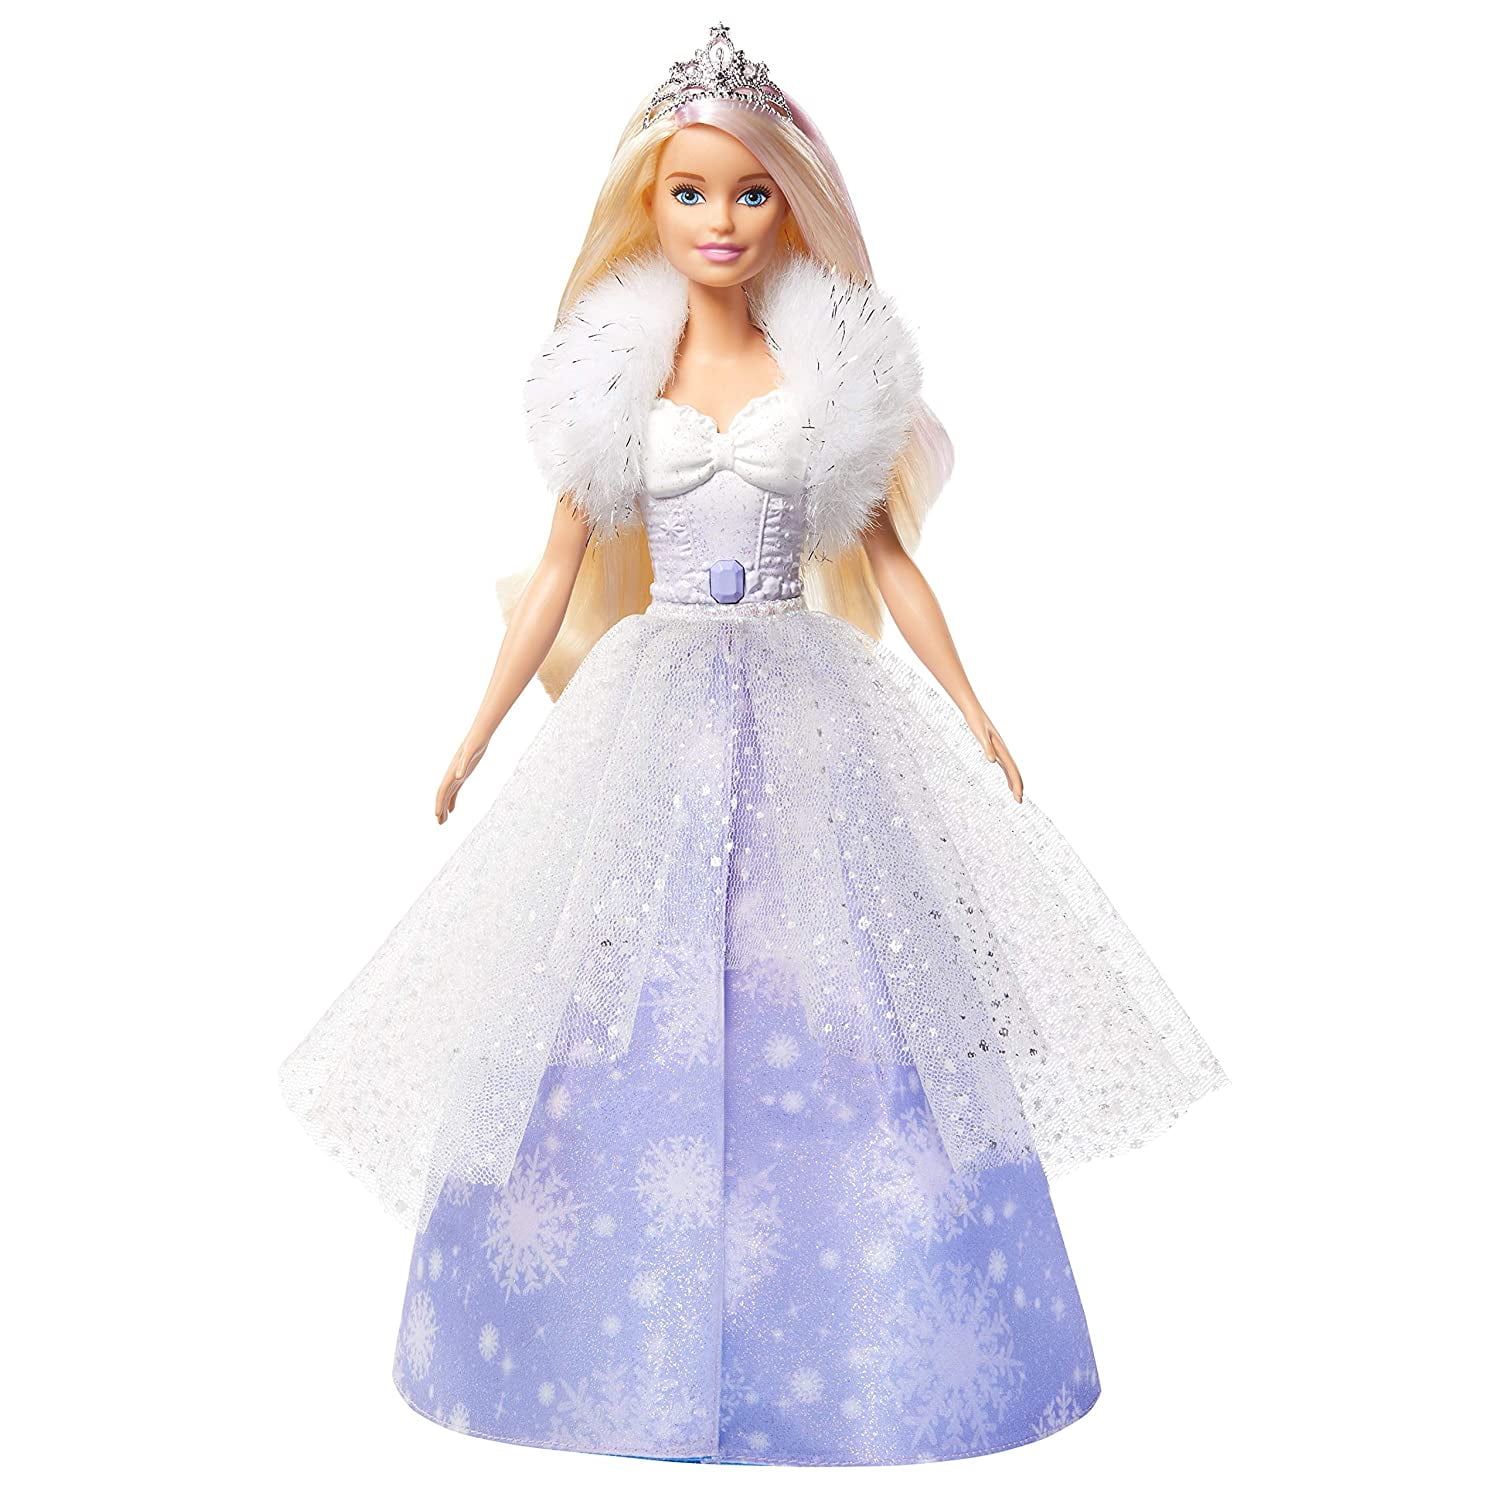 Barbie Dreamtopia Fashion Reveal Princess Doll, 12-Inch, Blonde with ...